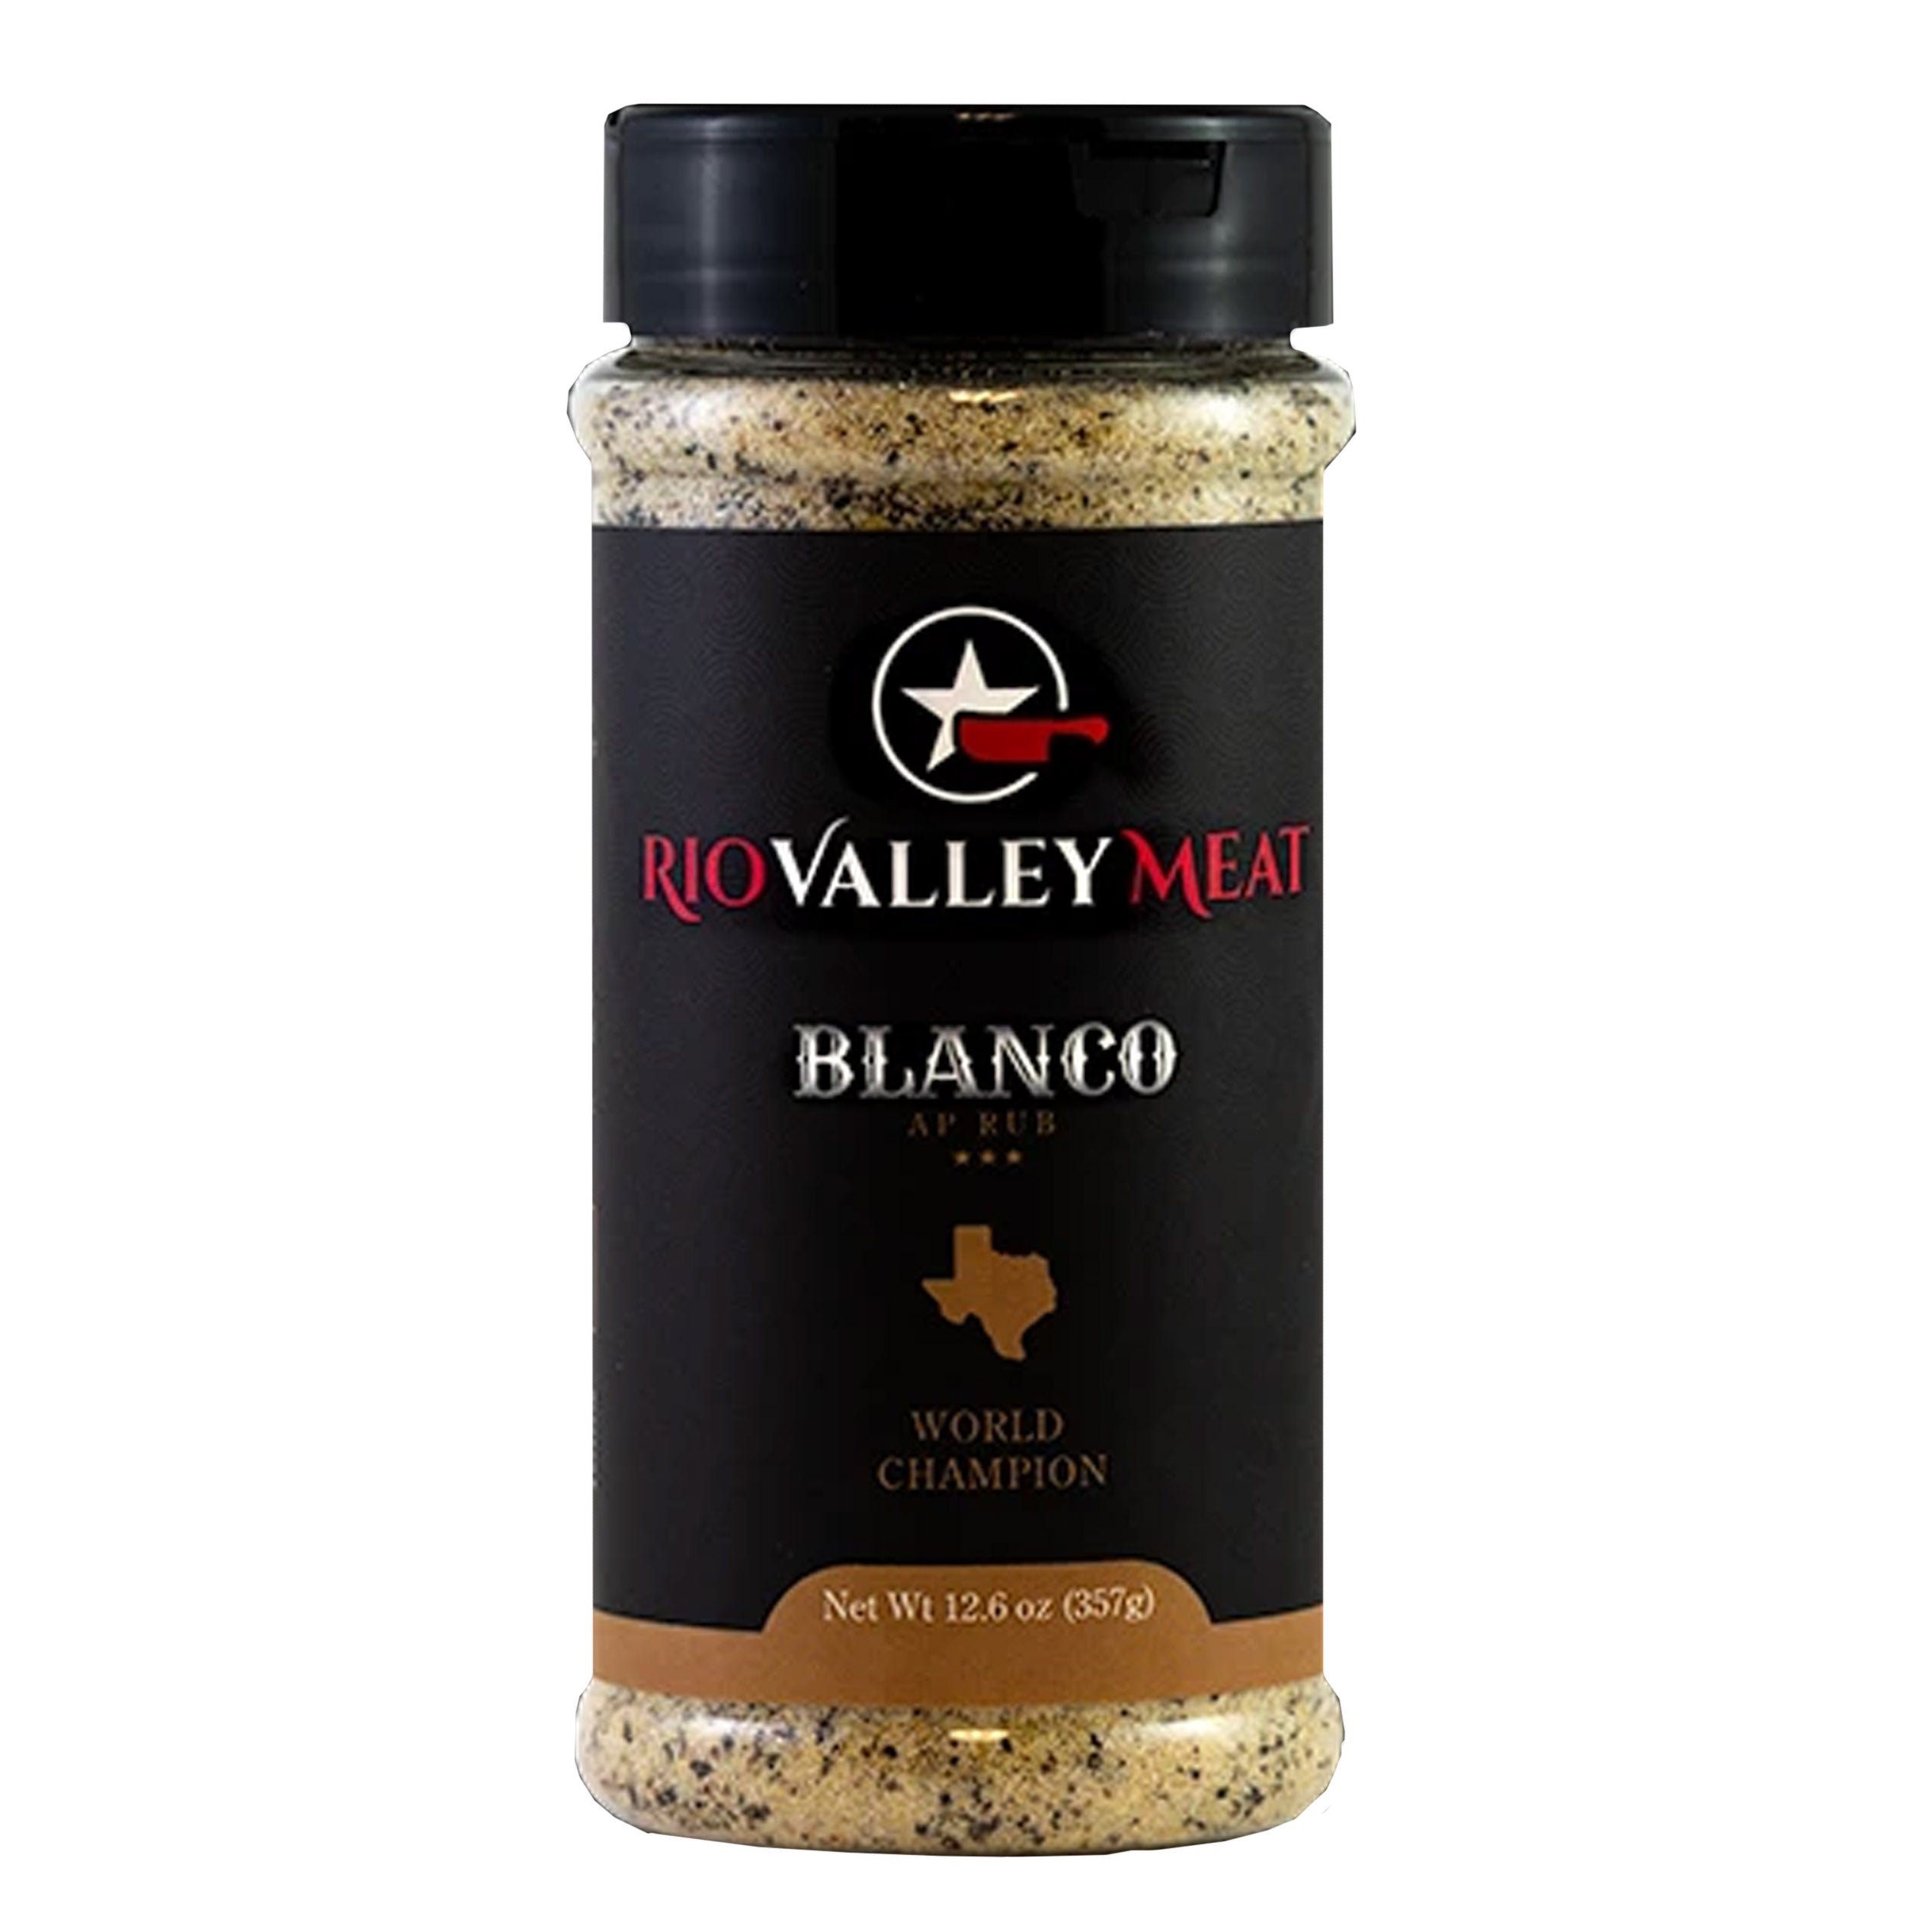 Rio Valley Meat Blanco All Purpose Rub AP 12.6 Oz Shaker Bottle OW9100 –  Pricedrightsales